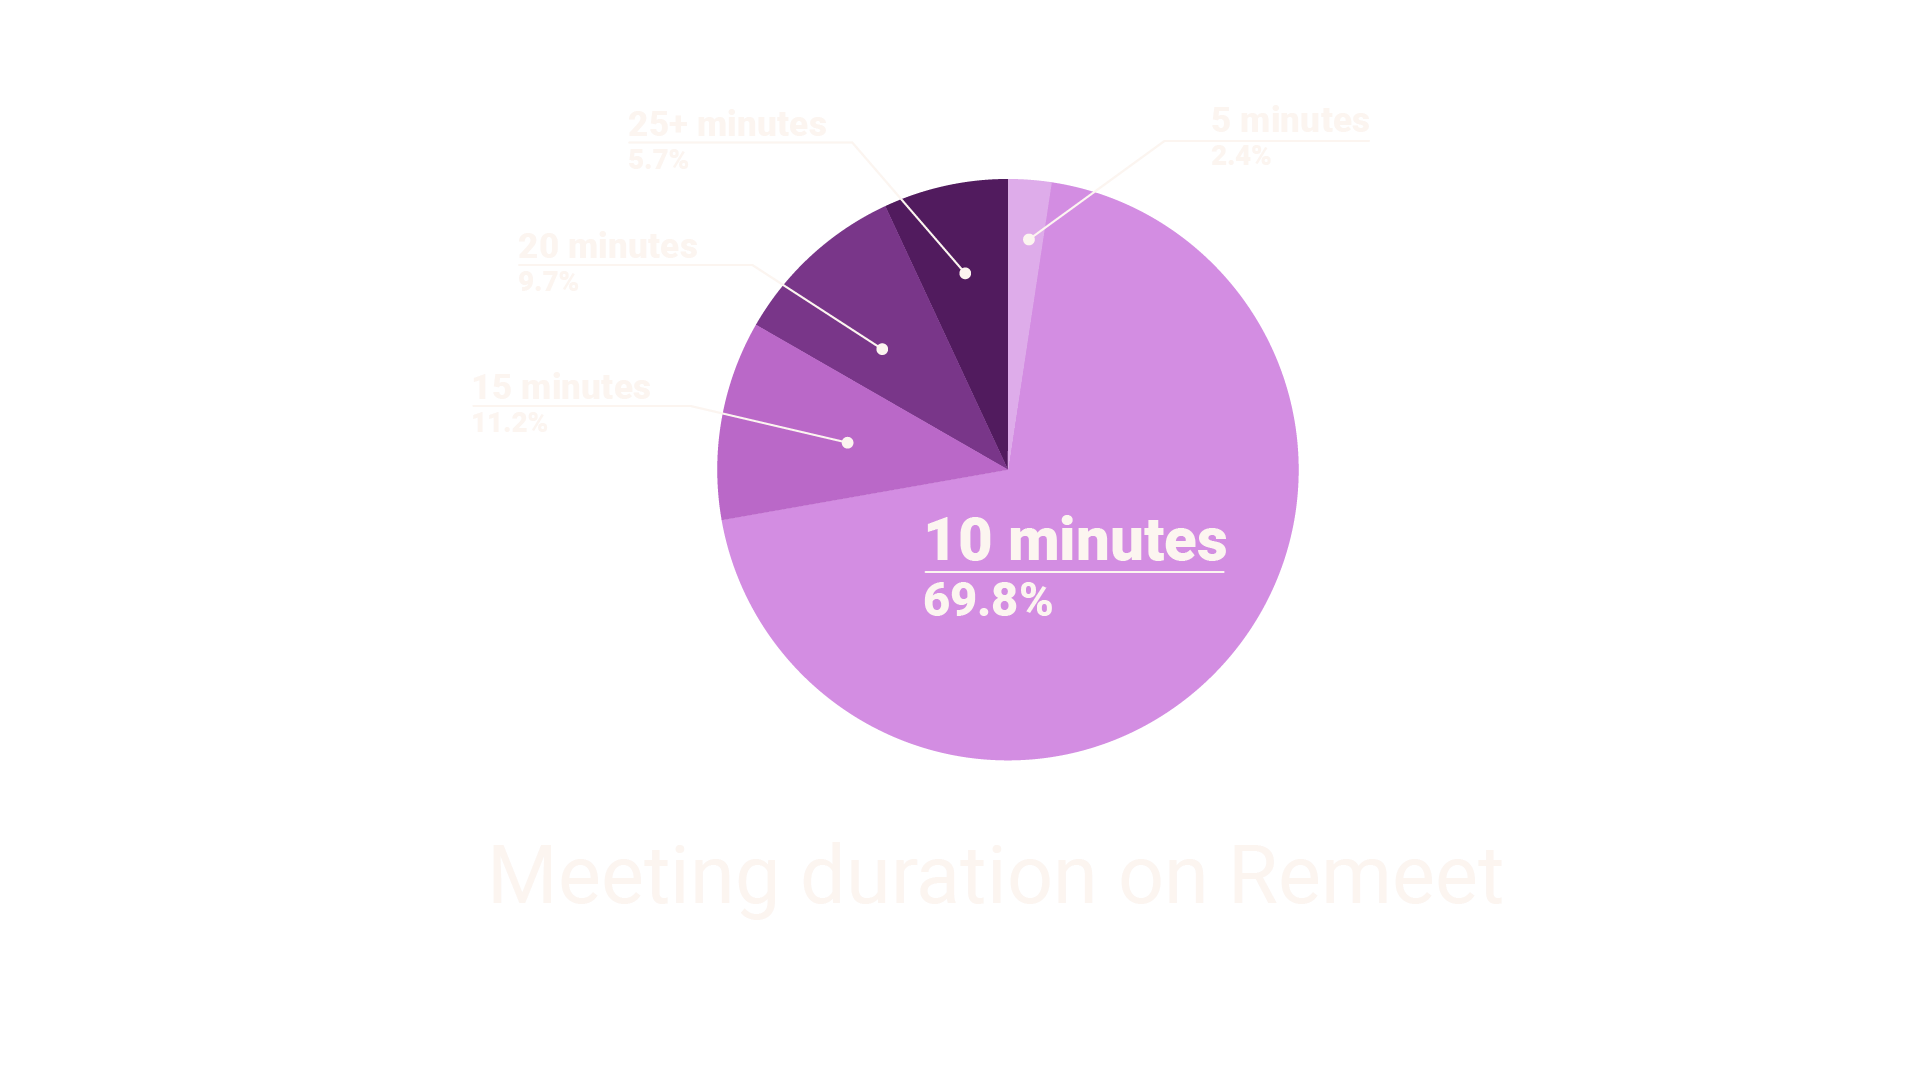 70% of meetings on Remeet are just 10 minutes long